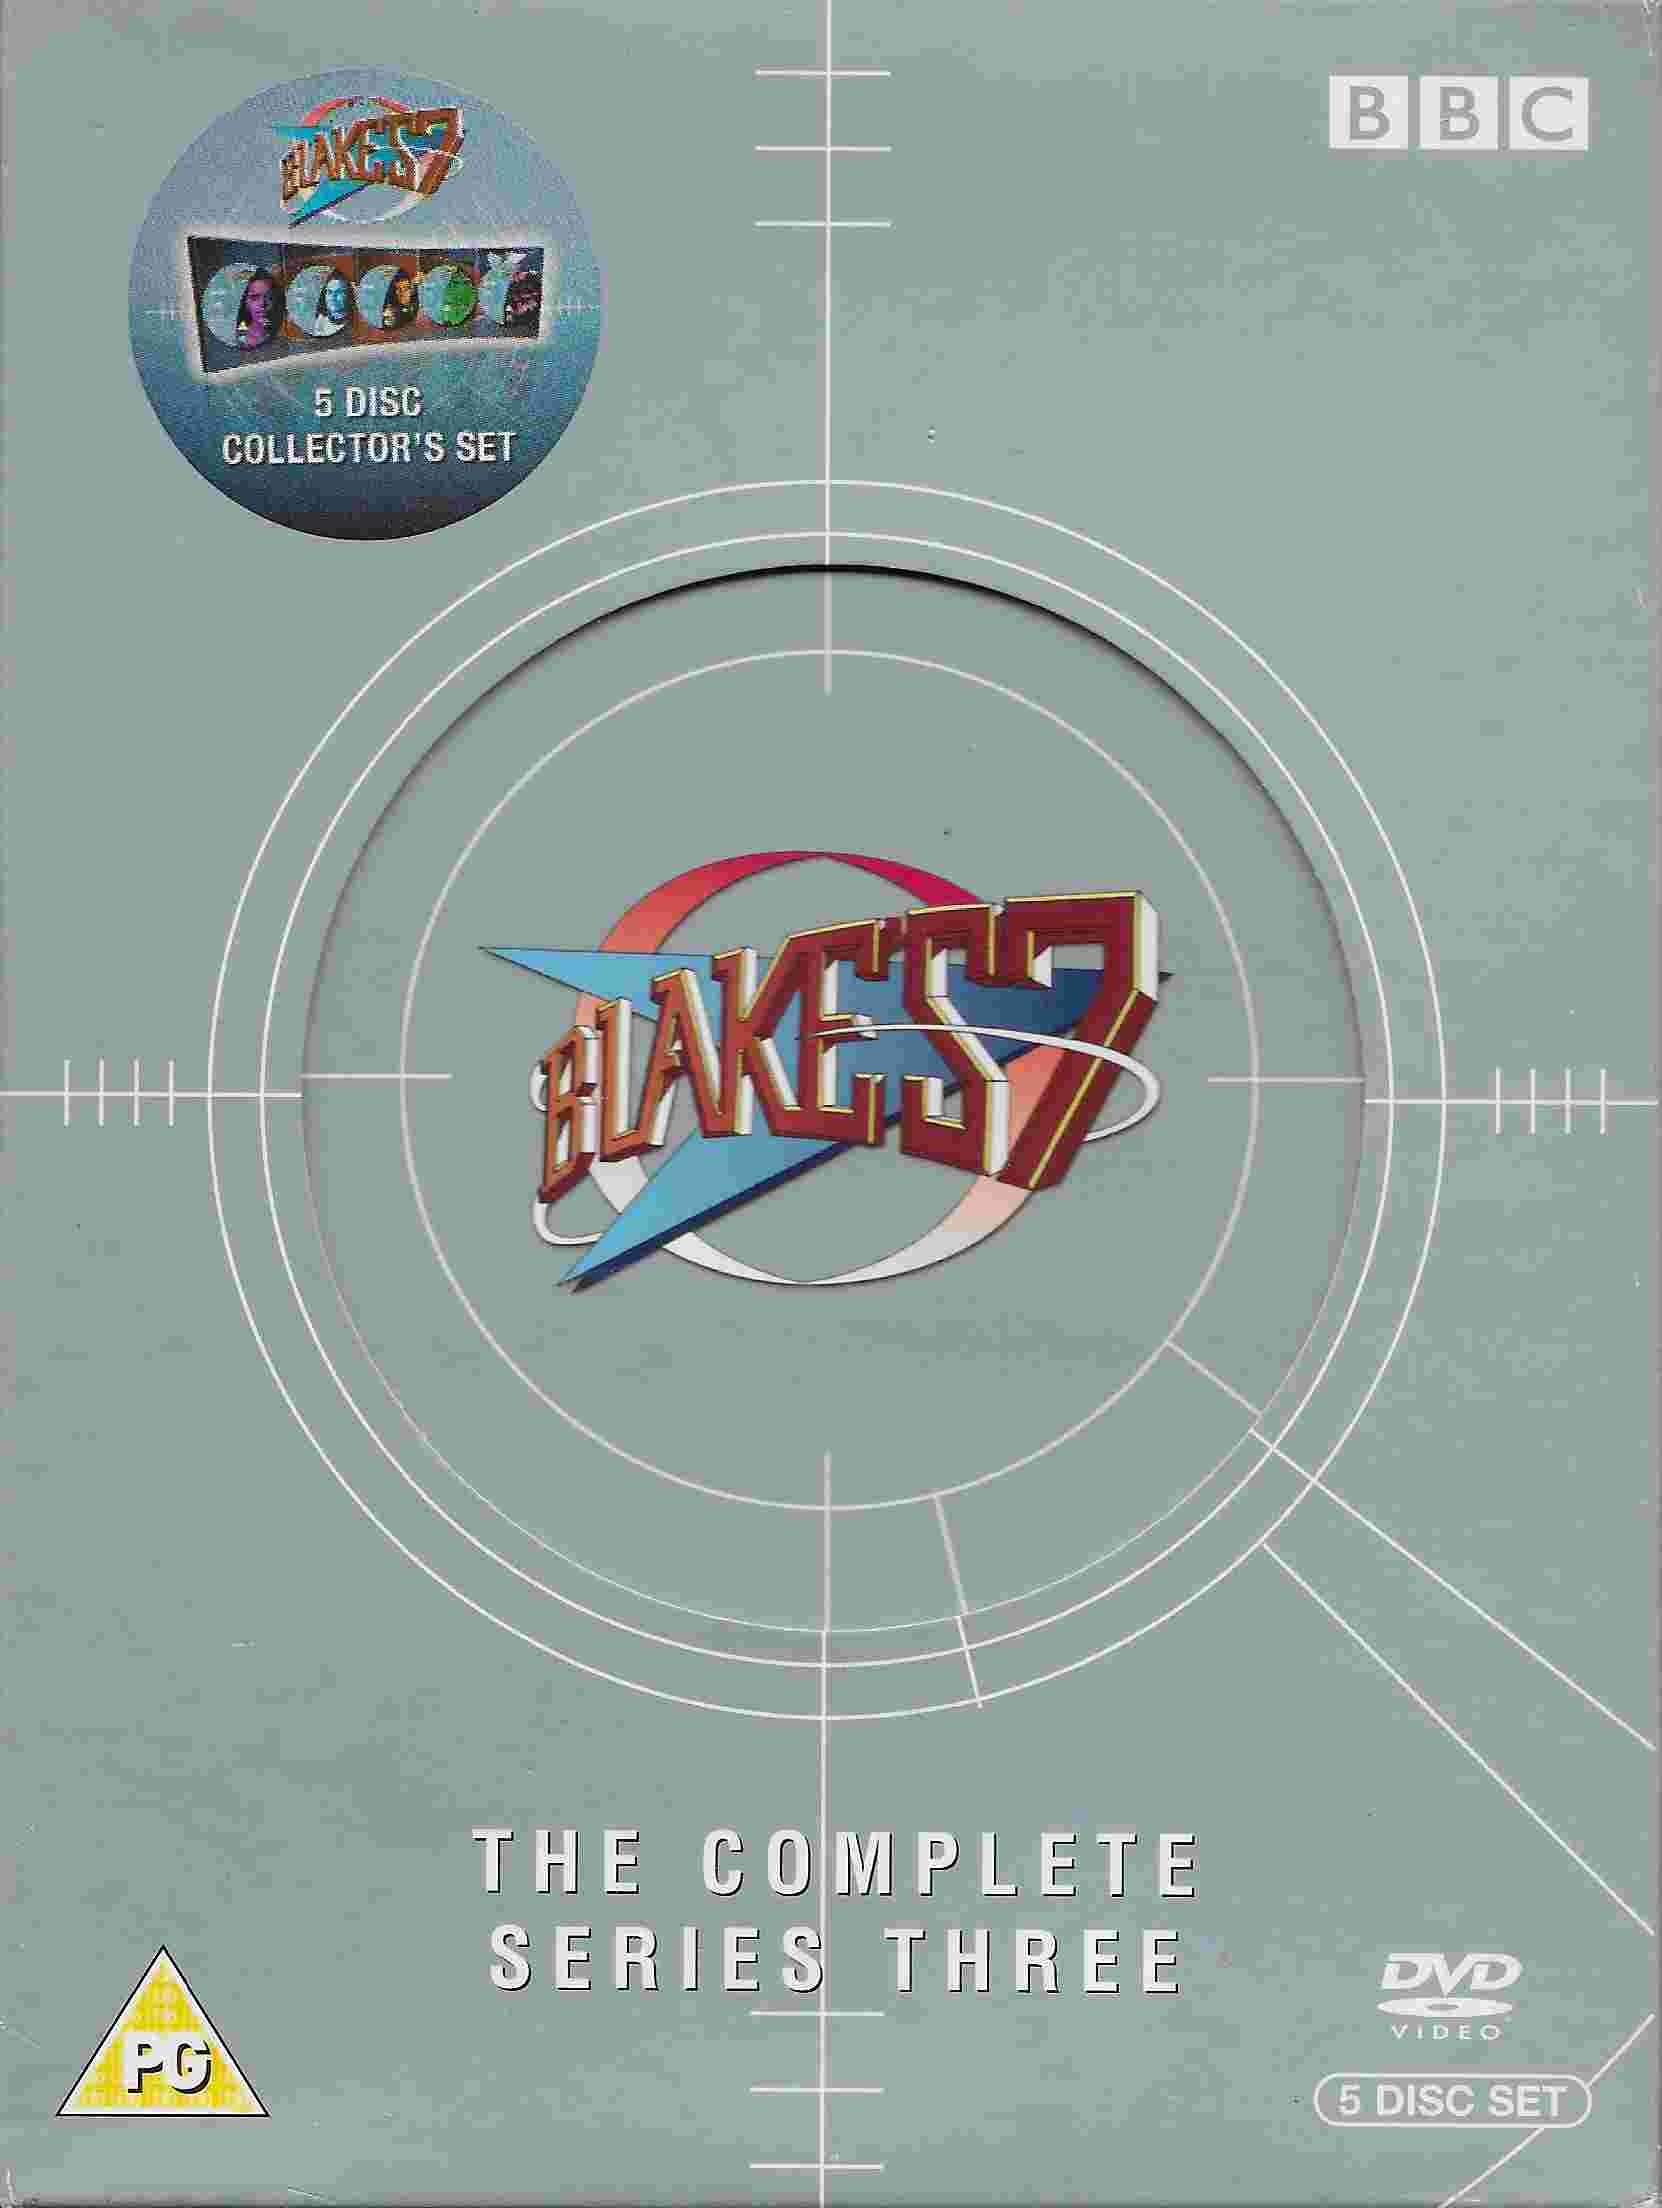 Picture of BBCDVD 1789 Blake's 7 - Series 3 by artist Terry Nation / Allan Prior / James Follett / Ben Steed / Chris Boucher / Roger Parkes / Tanith Lee / Trevor Hoyle from the BBC dvds - Records and Tapes library